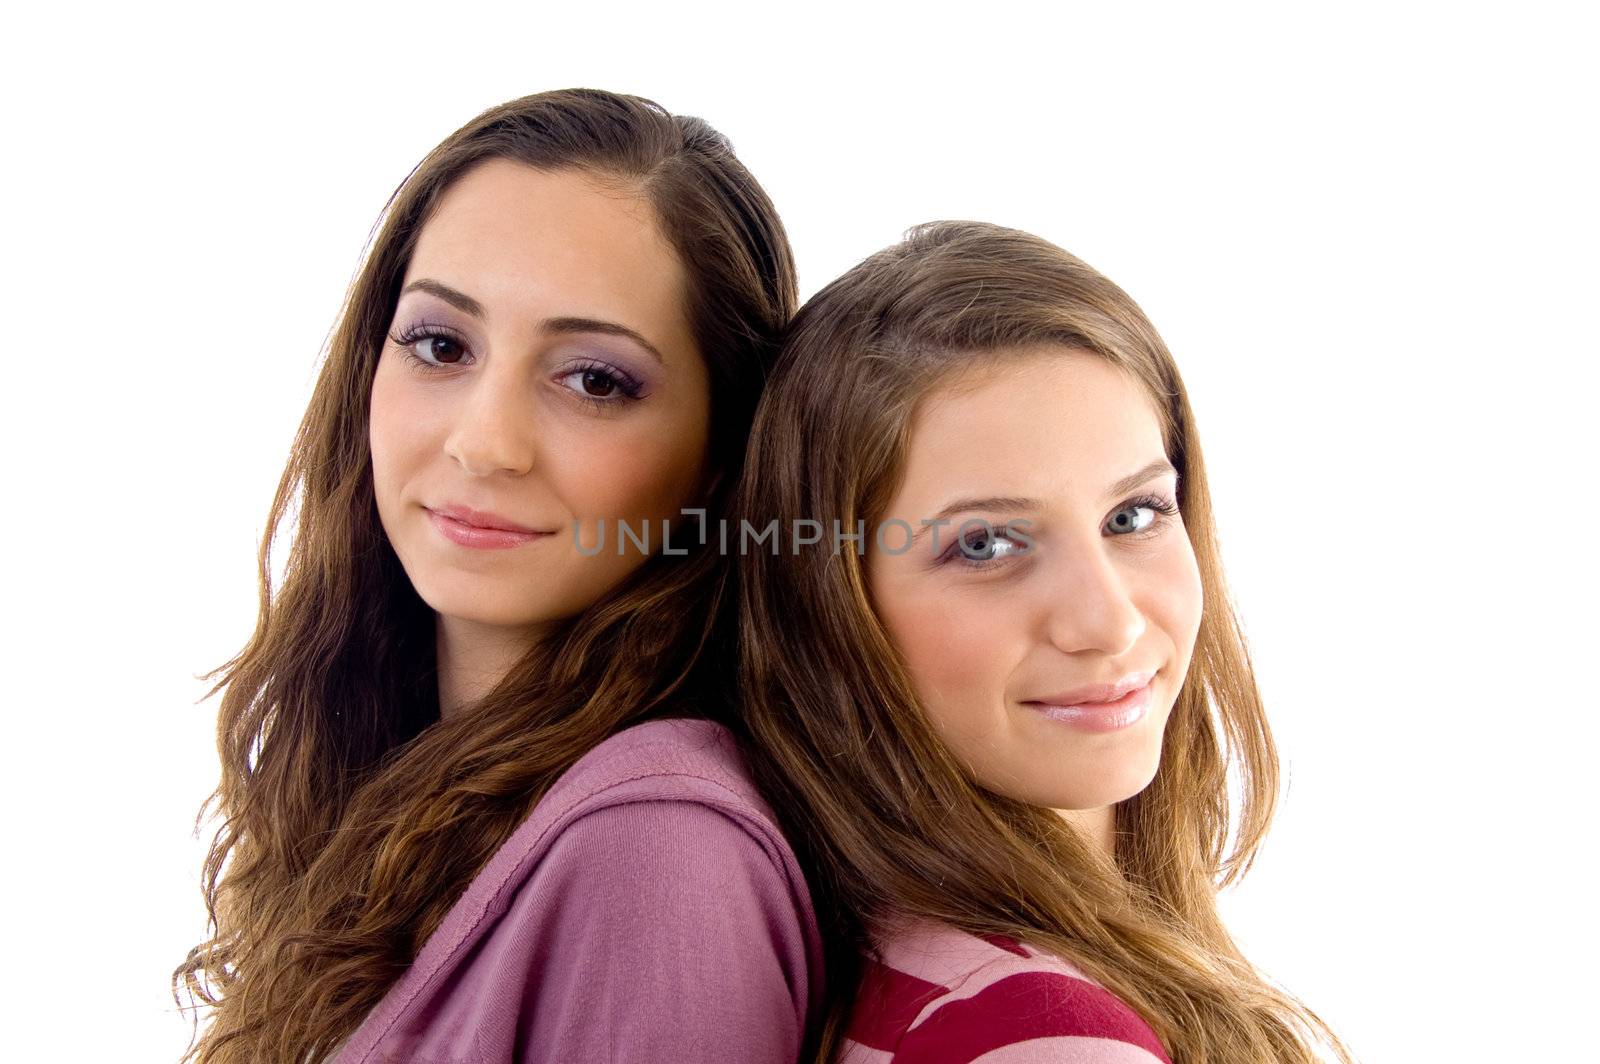 close up view of teens friends smiling and looking at camera by imagerymajestic